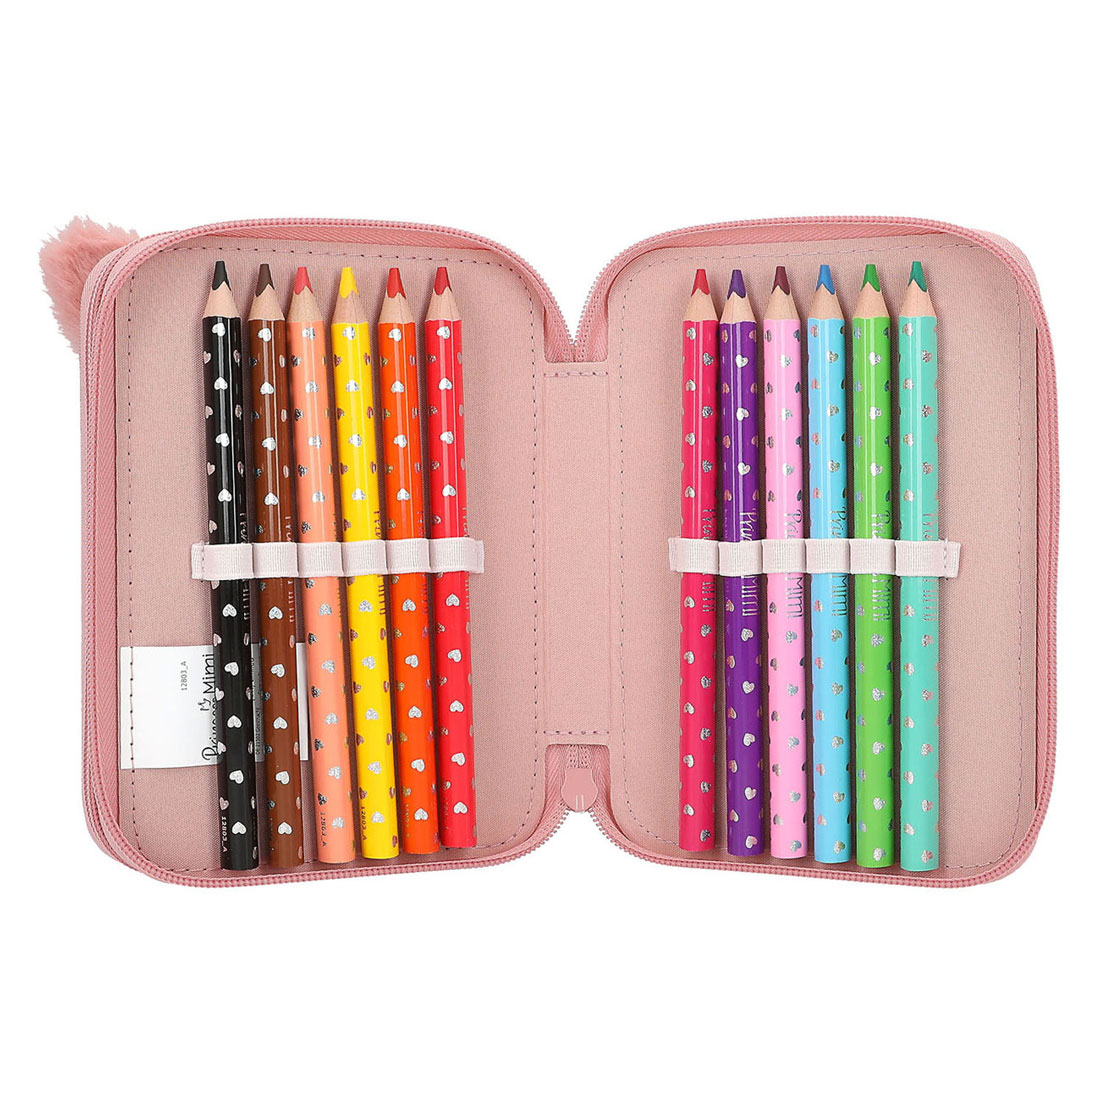 Trousse à crayons 2 poches Princess Mimi Deer Kitty Love